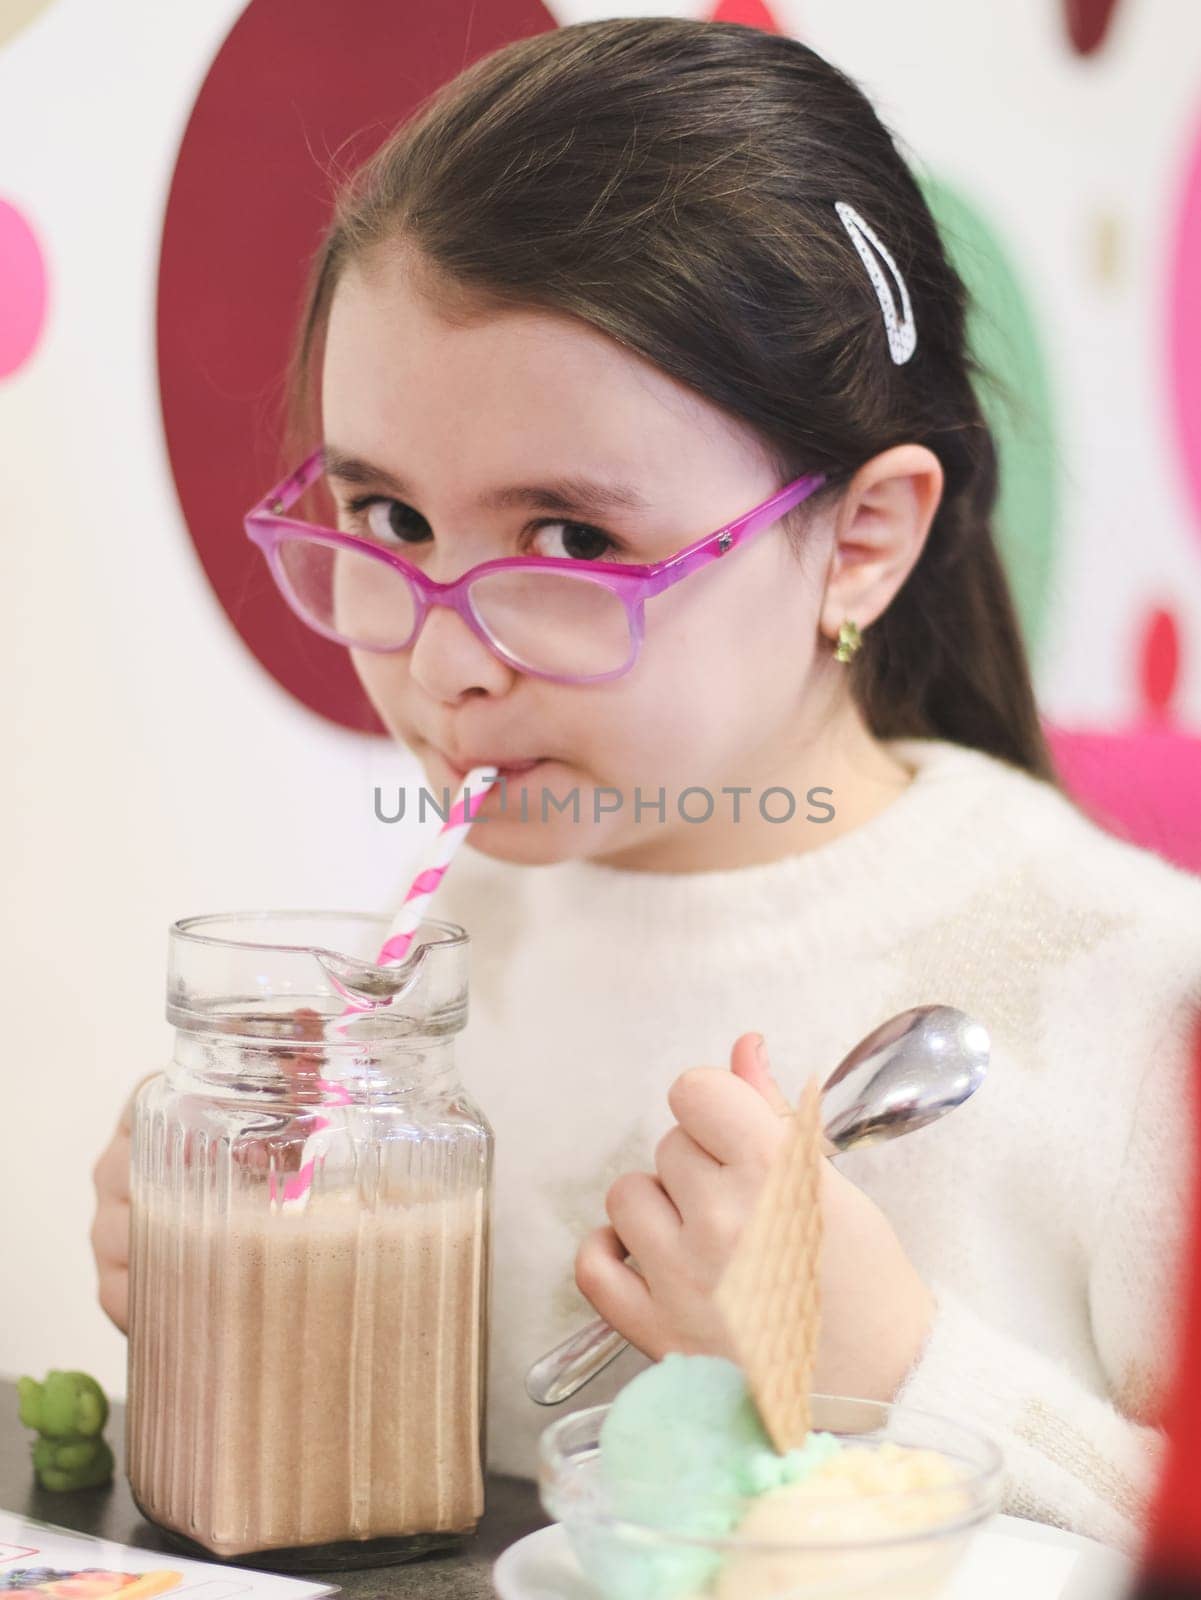 Portrait of a beautiful Caucasian brunette girl in glasses sitting at a table with ice cream and drinking a chocolate milkshake from a straw from a glass mug in a cafe on a blurred abstract background, close-up side view with depth of field.